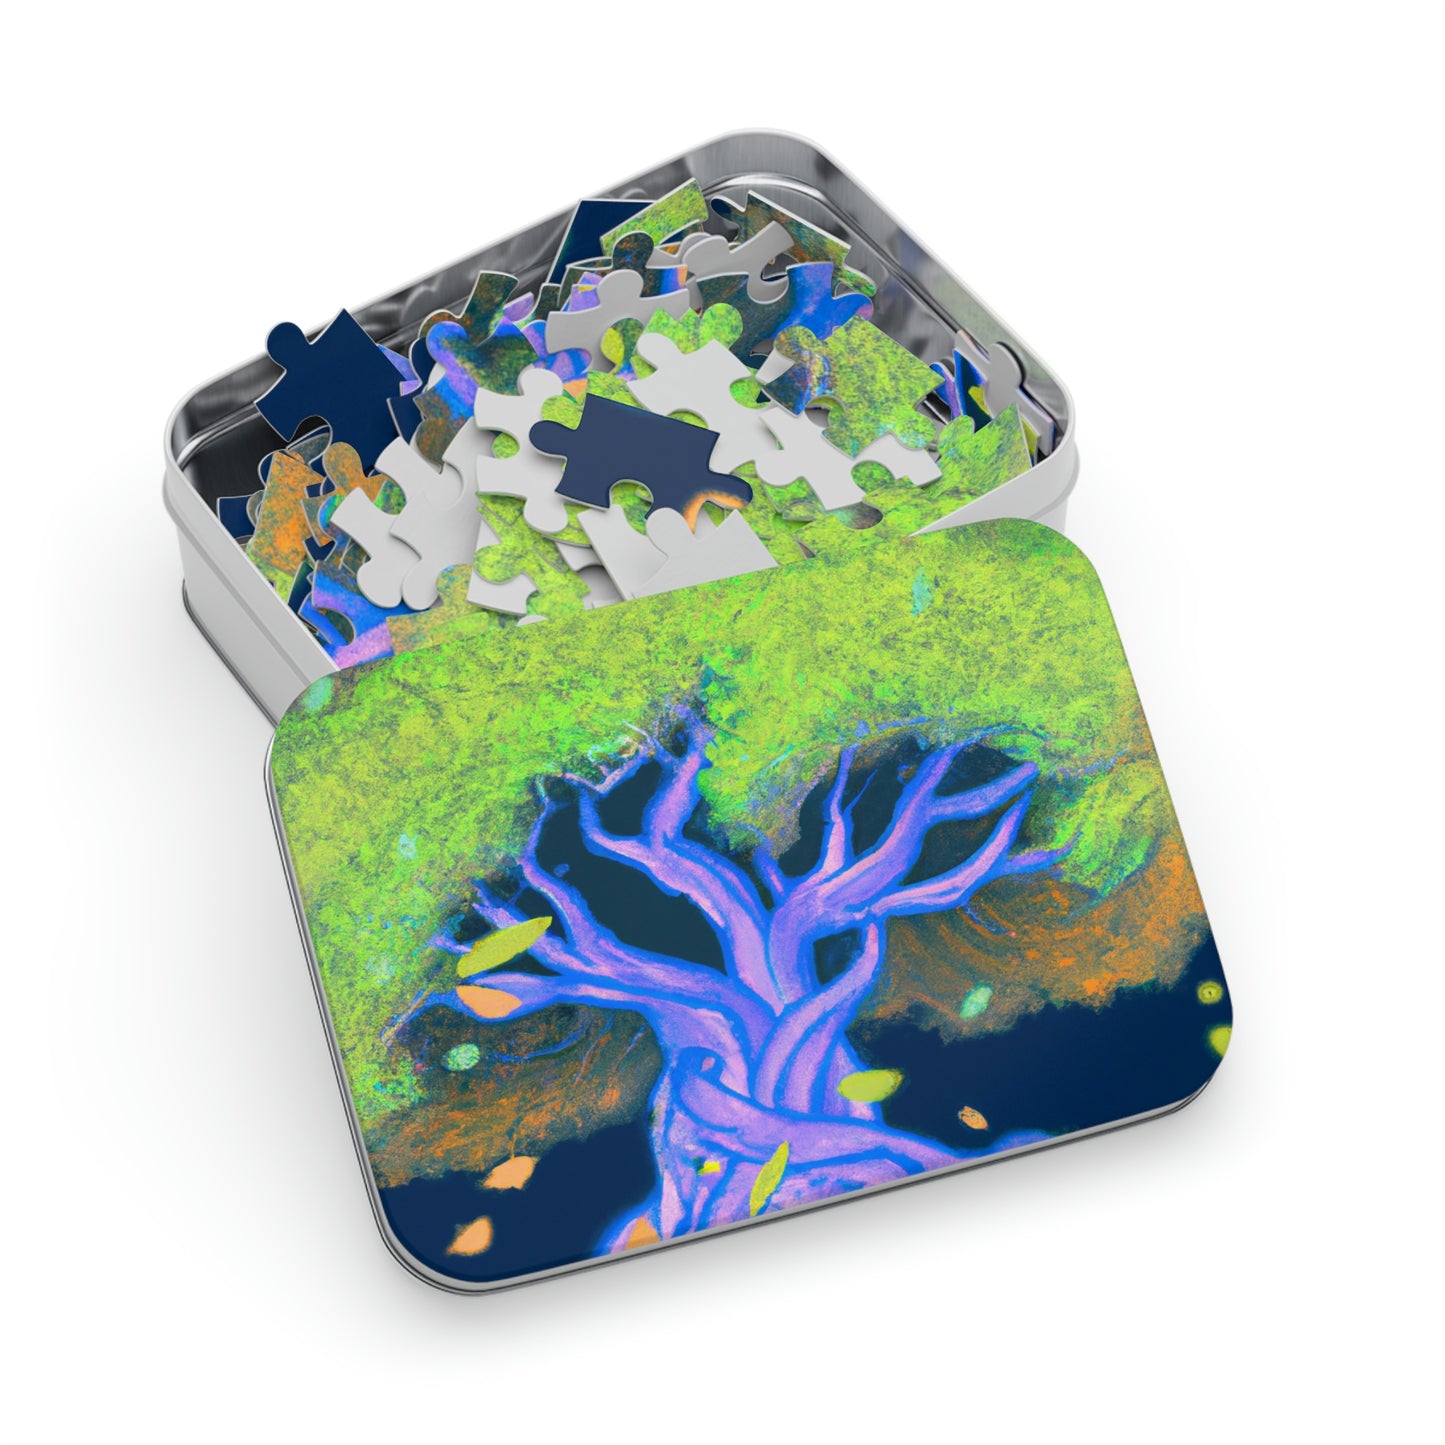 "The Enchanted Tree" - The Alien Jigsaw Puzzle